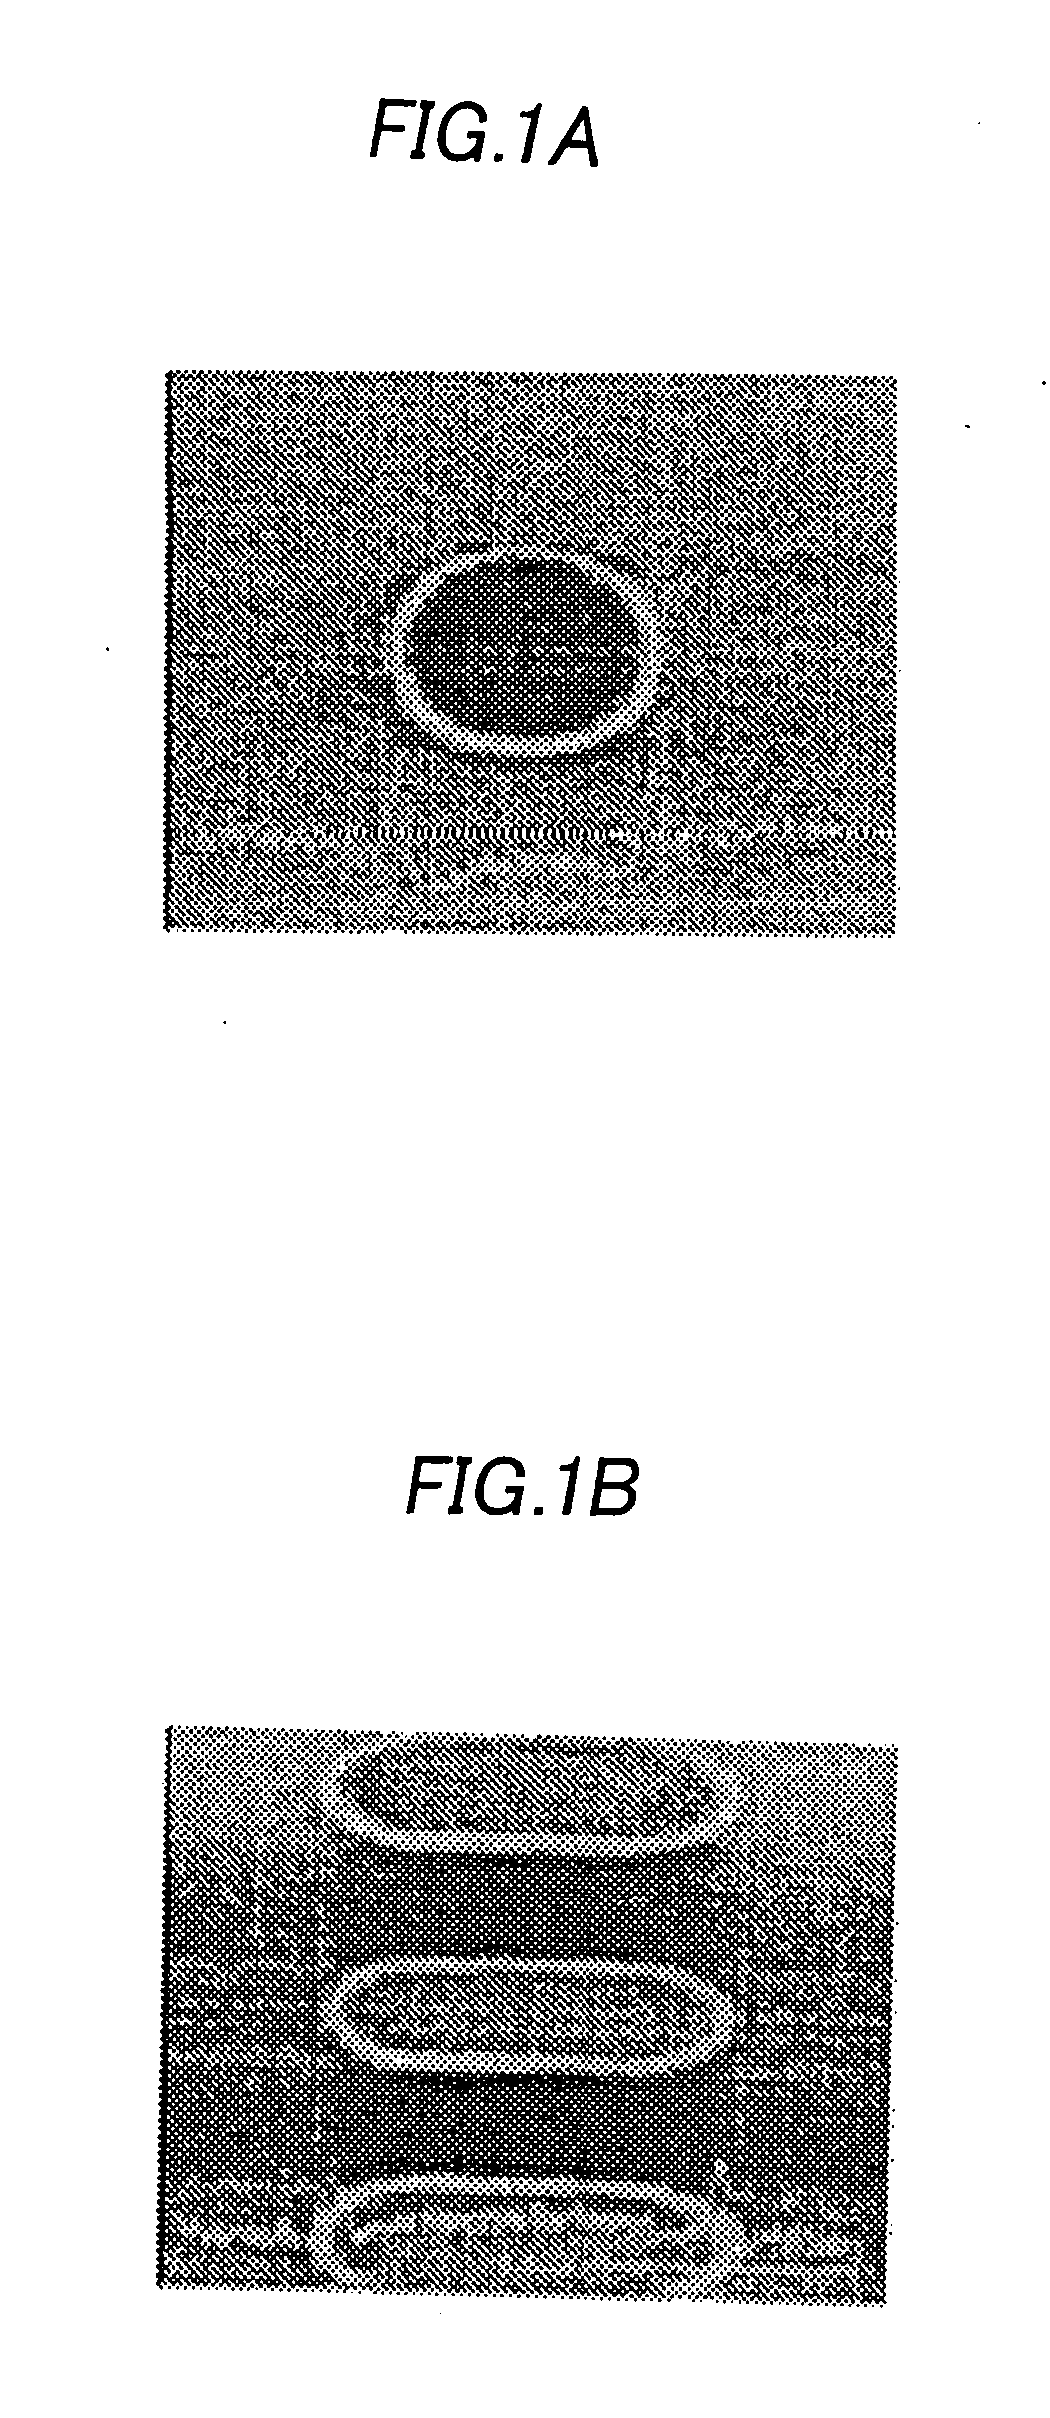 Semiconductor device manufacturing method, data generating apparatus, data generating method and recording medium readable by computer recoded with data generating program